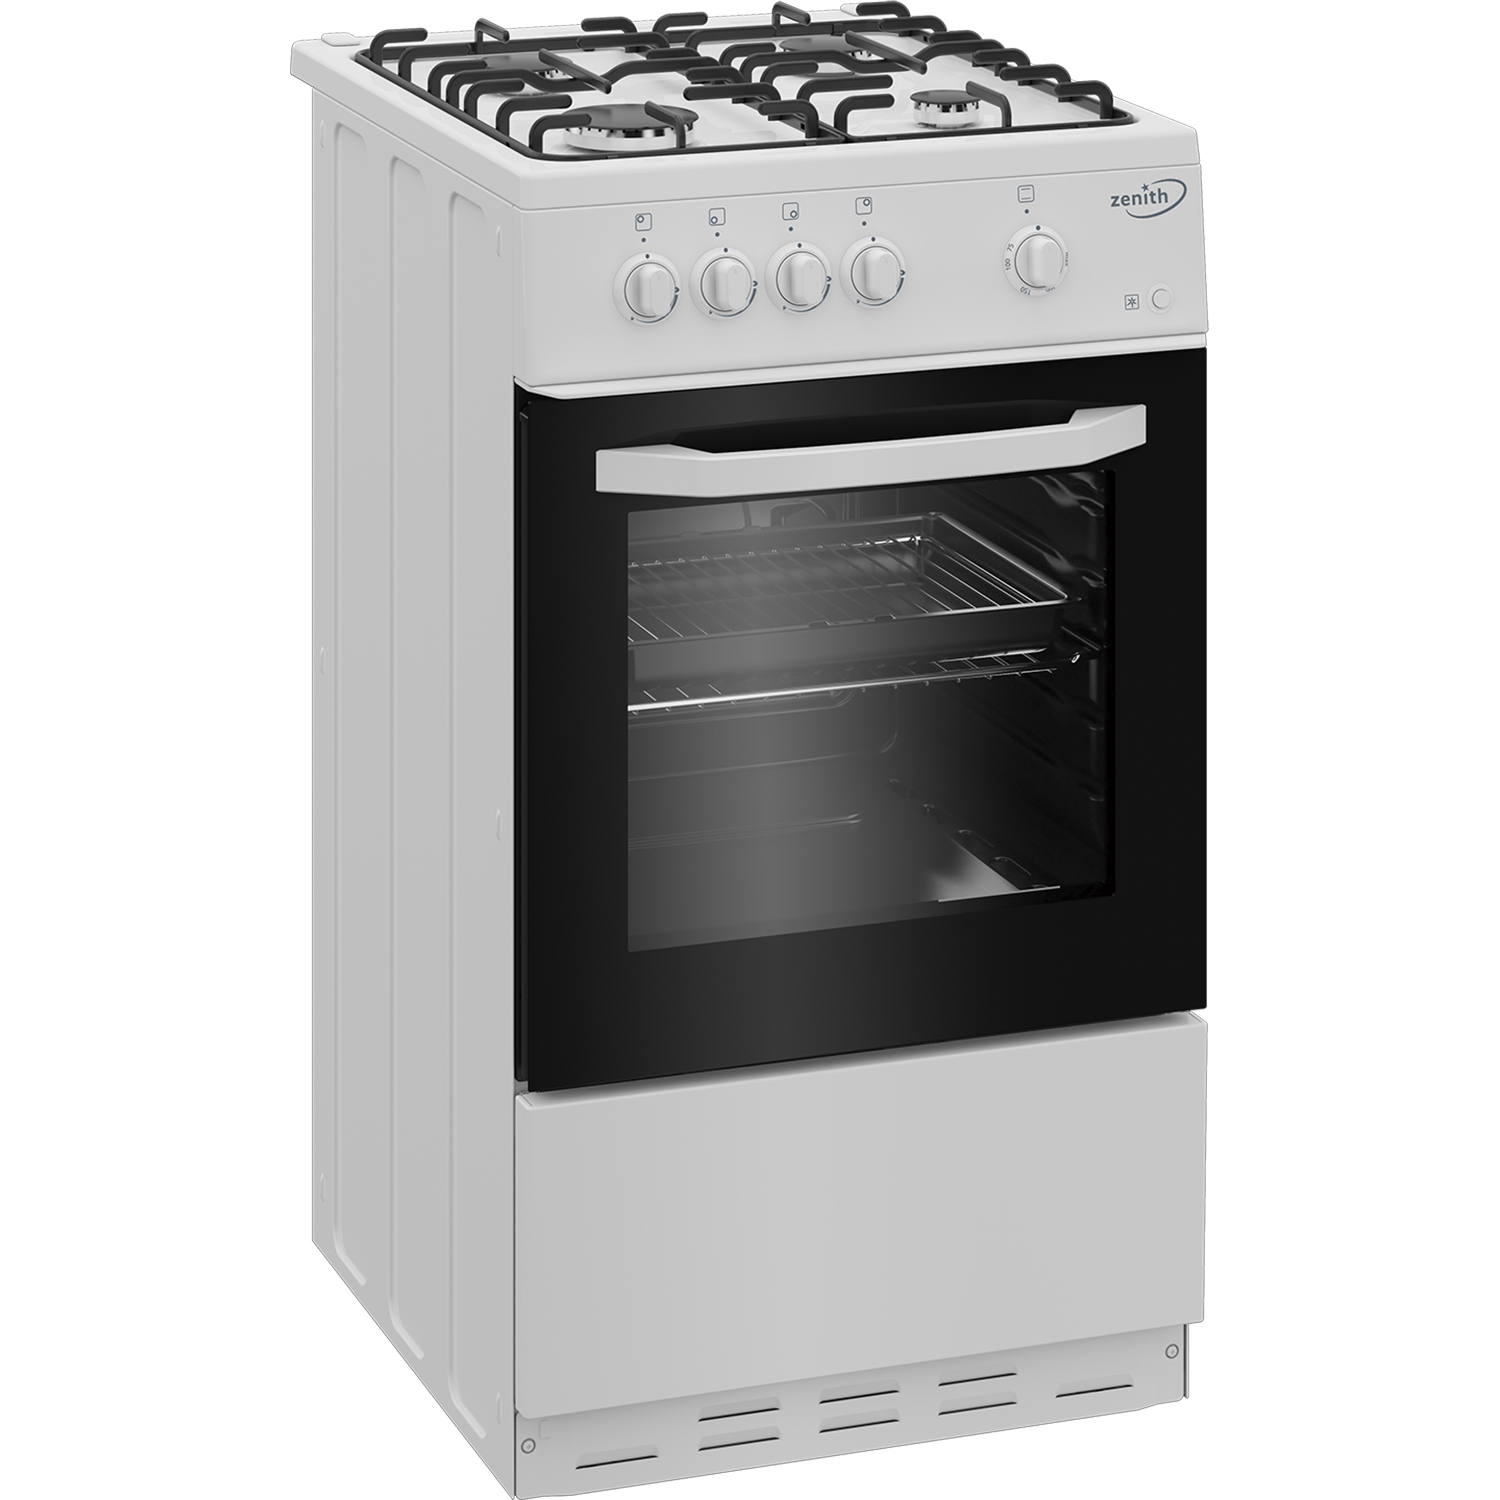 Zenith ZE501W 50cm Gas Single Oven with Gas Hob - White - 4